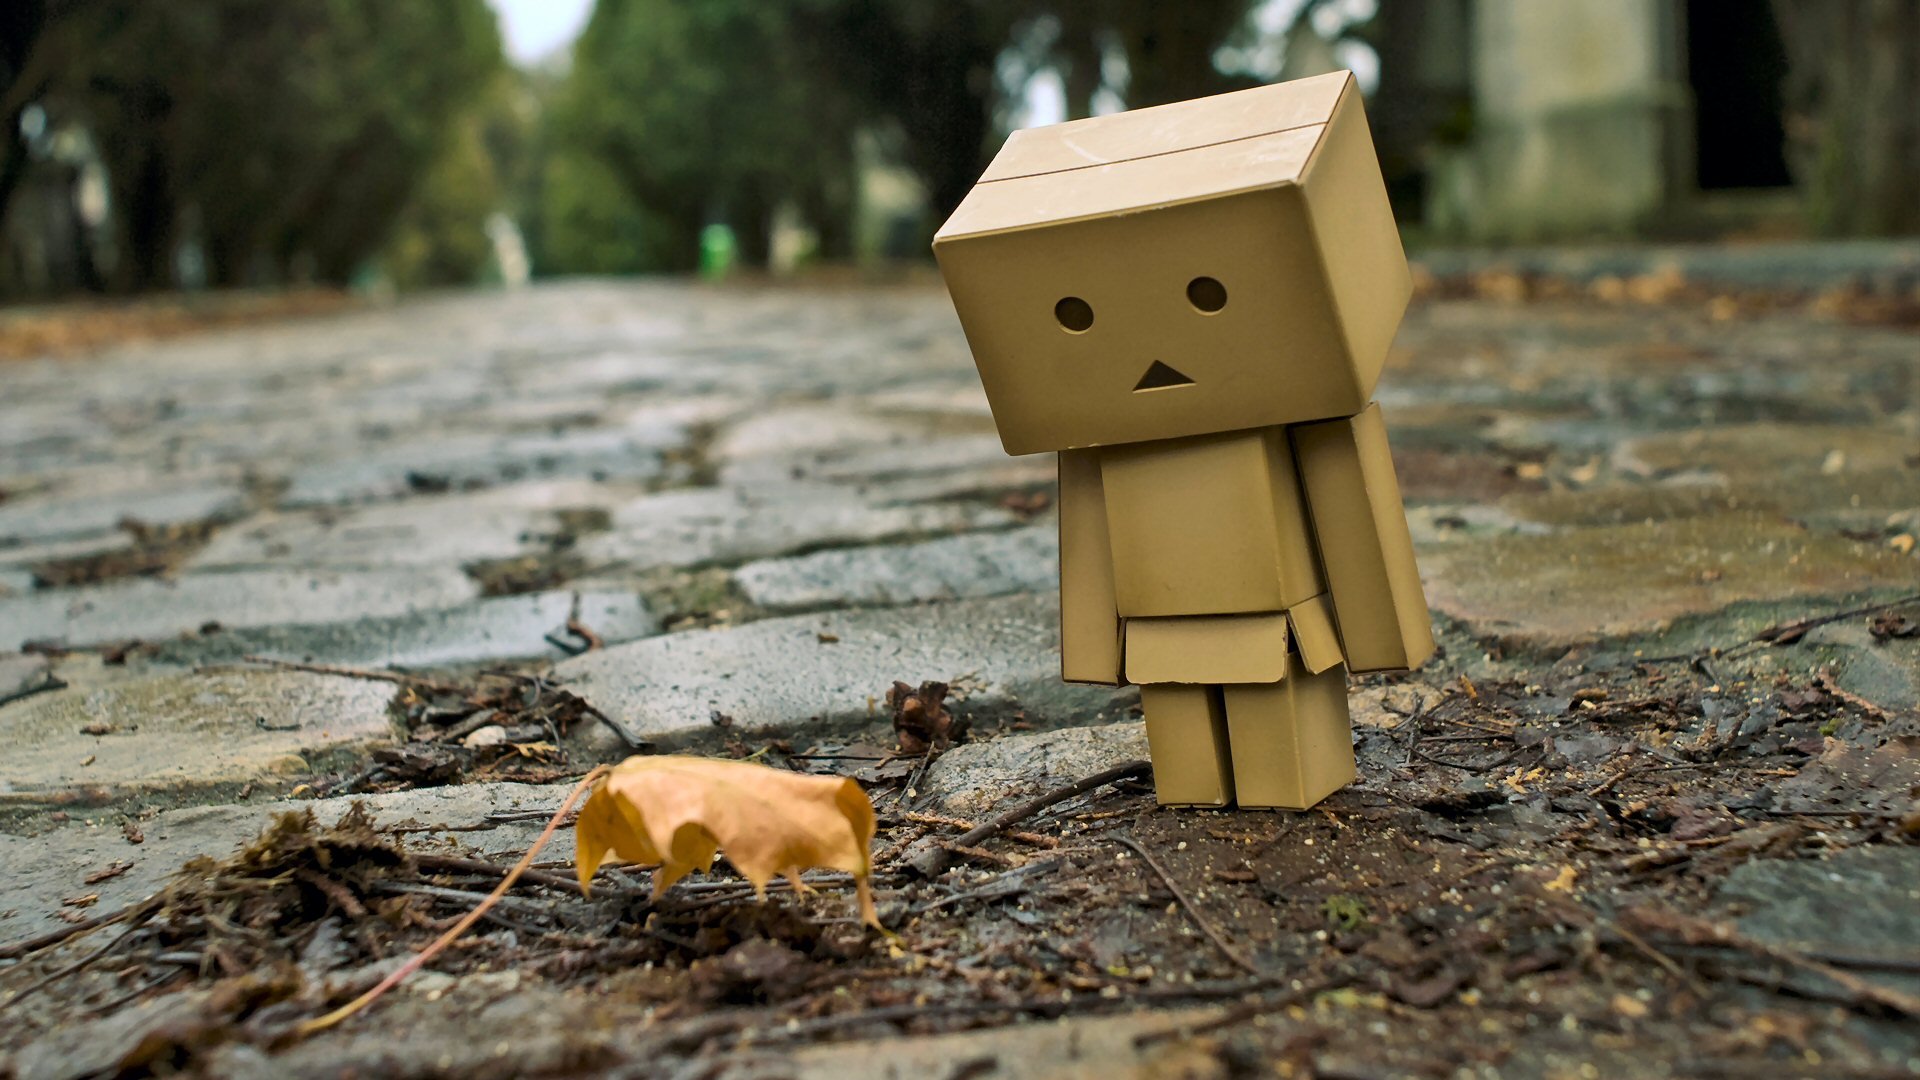 96 Danbo HD Wallpapers Backgrounds Wallpaper Abyss